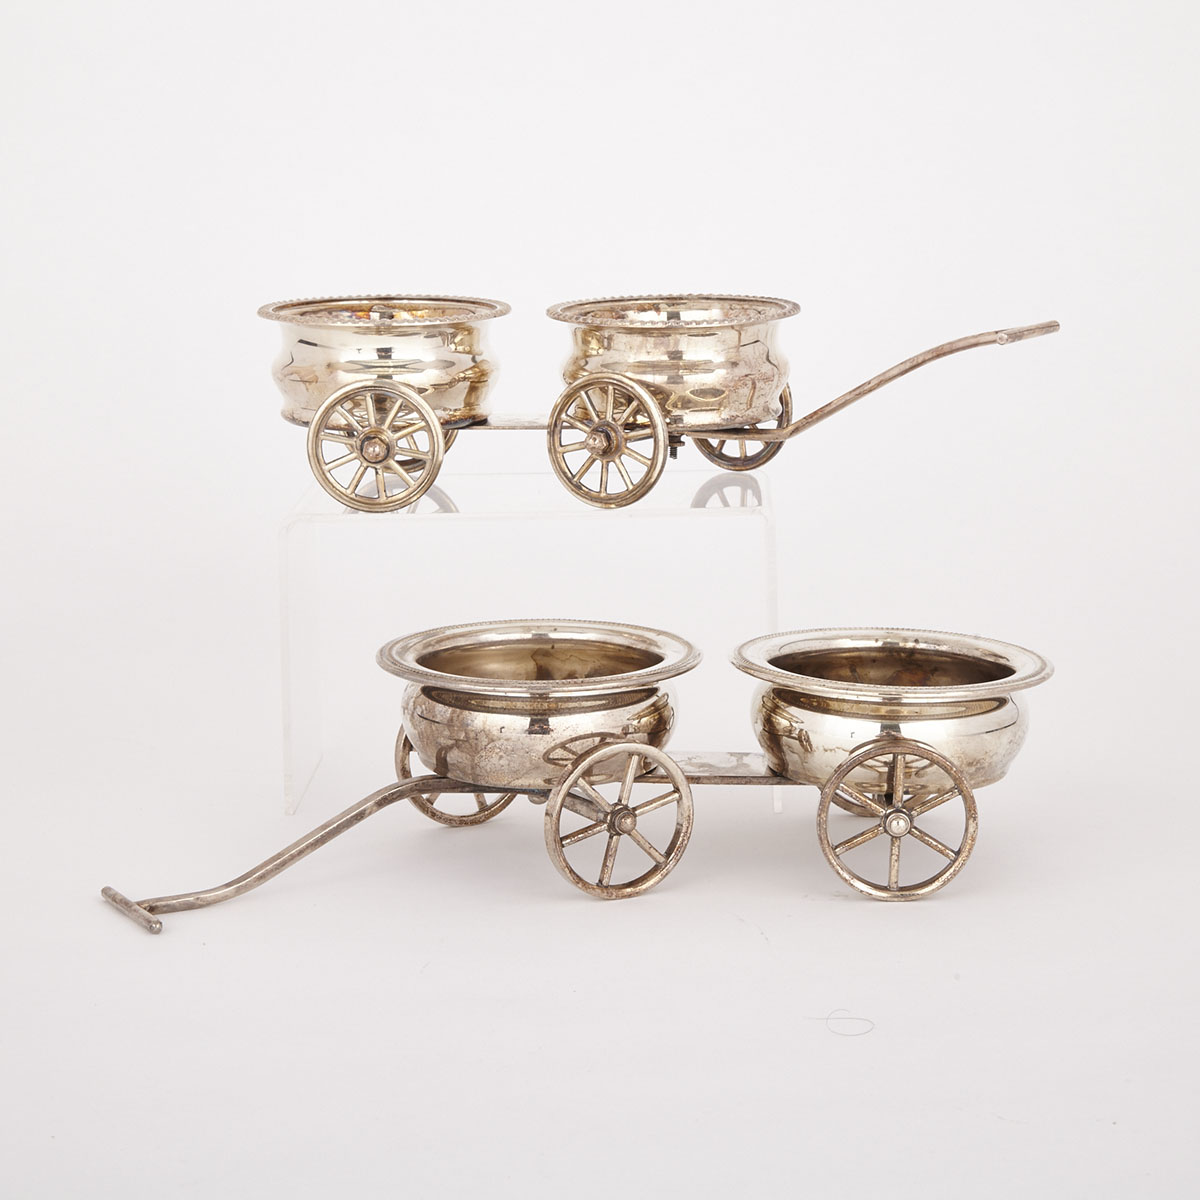 Two Silver Plated Wine Trolleys, 20th century